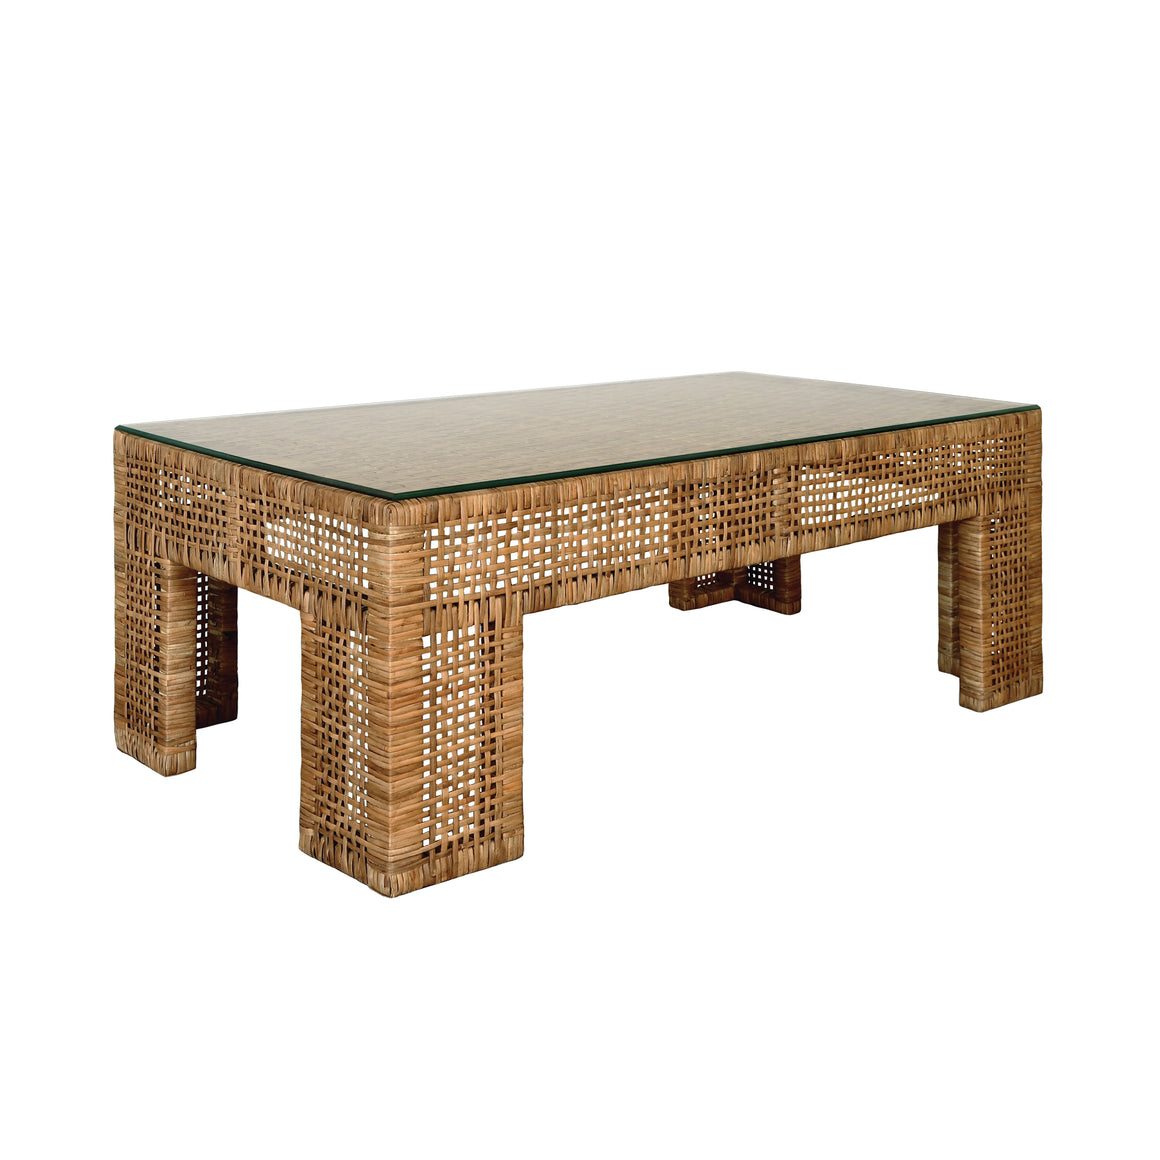 Wide Leg Rectangular Rattan Coffee Table with Glass Top